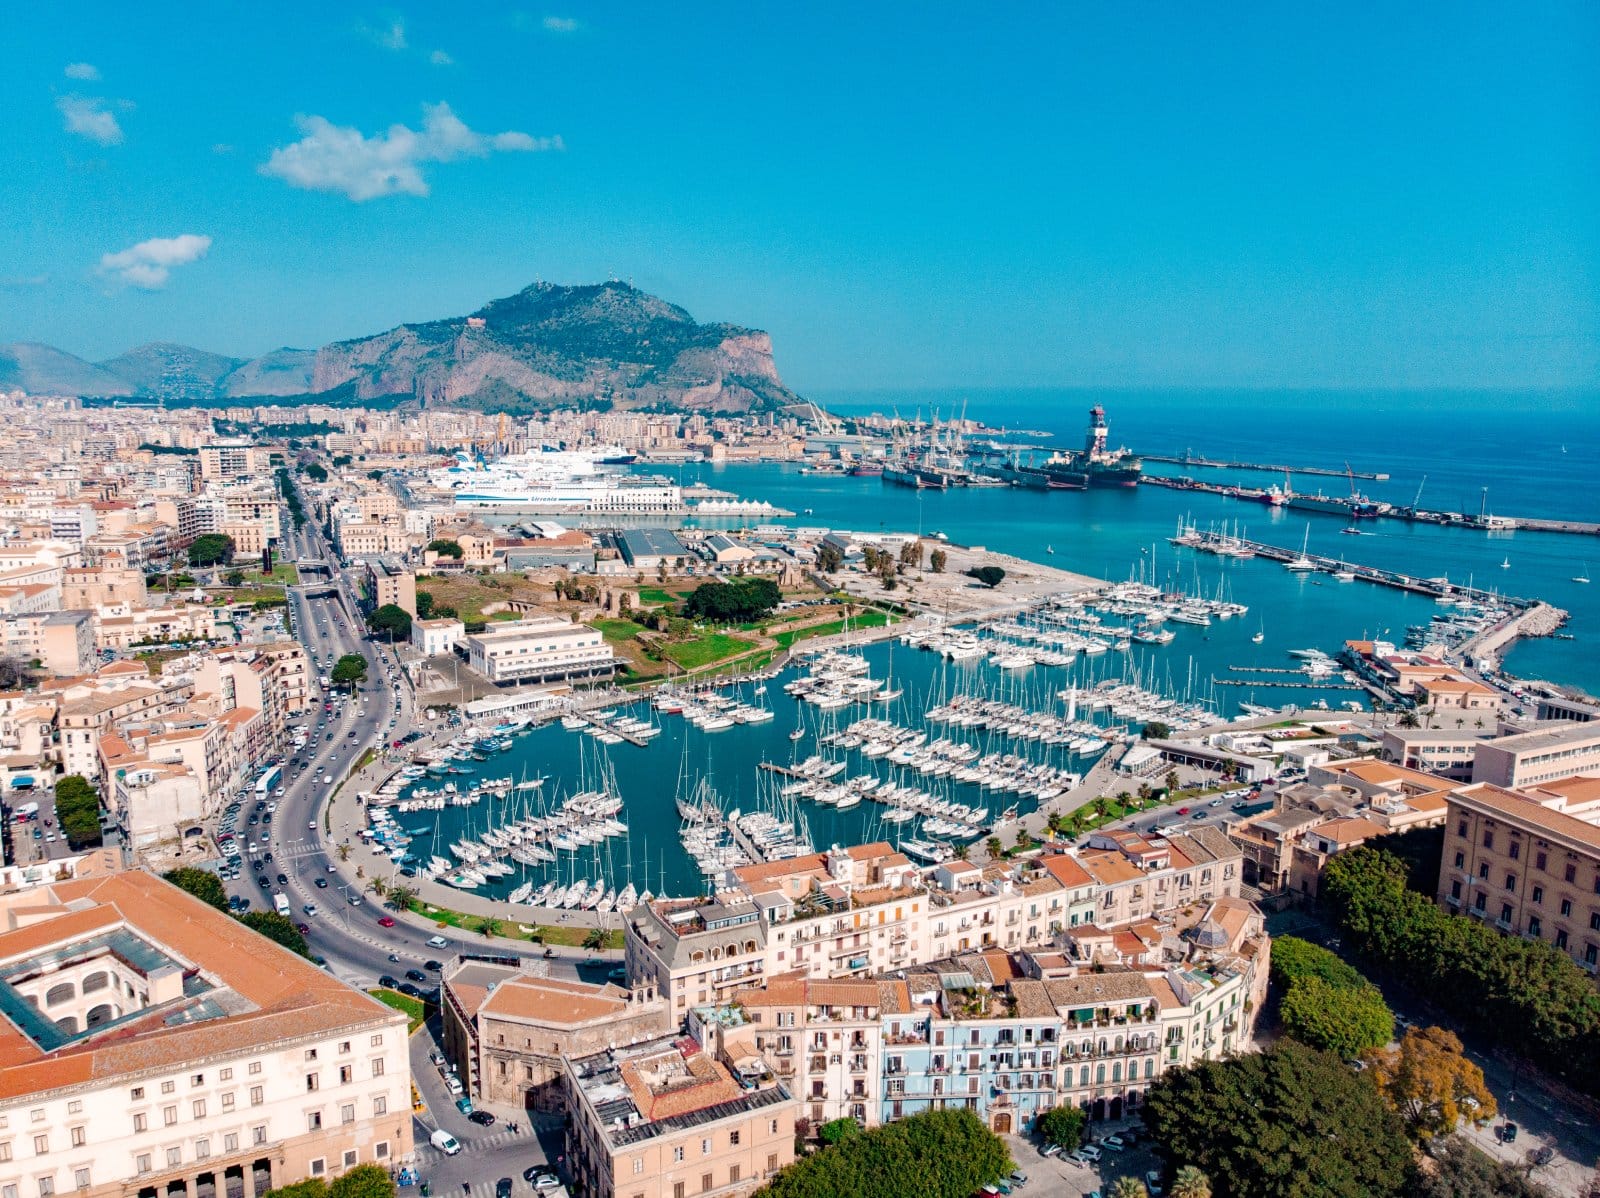 <p class="wp-caption-text">Image Credit: Shutterstock / logaen</p>  <p>Palermo is a budget-friendly Italian gem, offering cheaper accommodations and food compared to Italy’s more northern cities, without skimping on the cultural experience.</p>